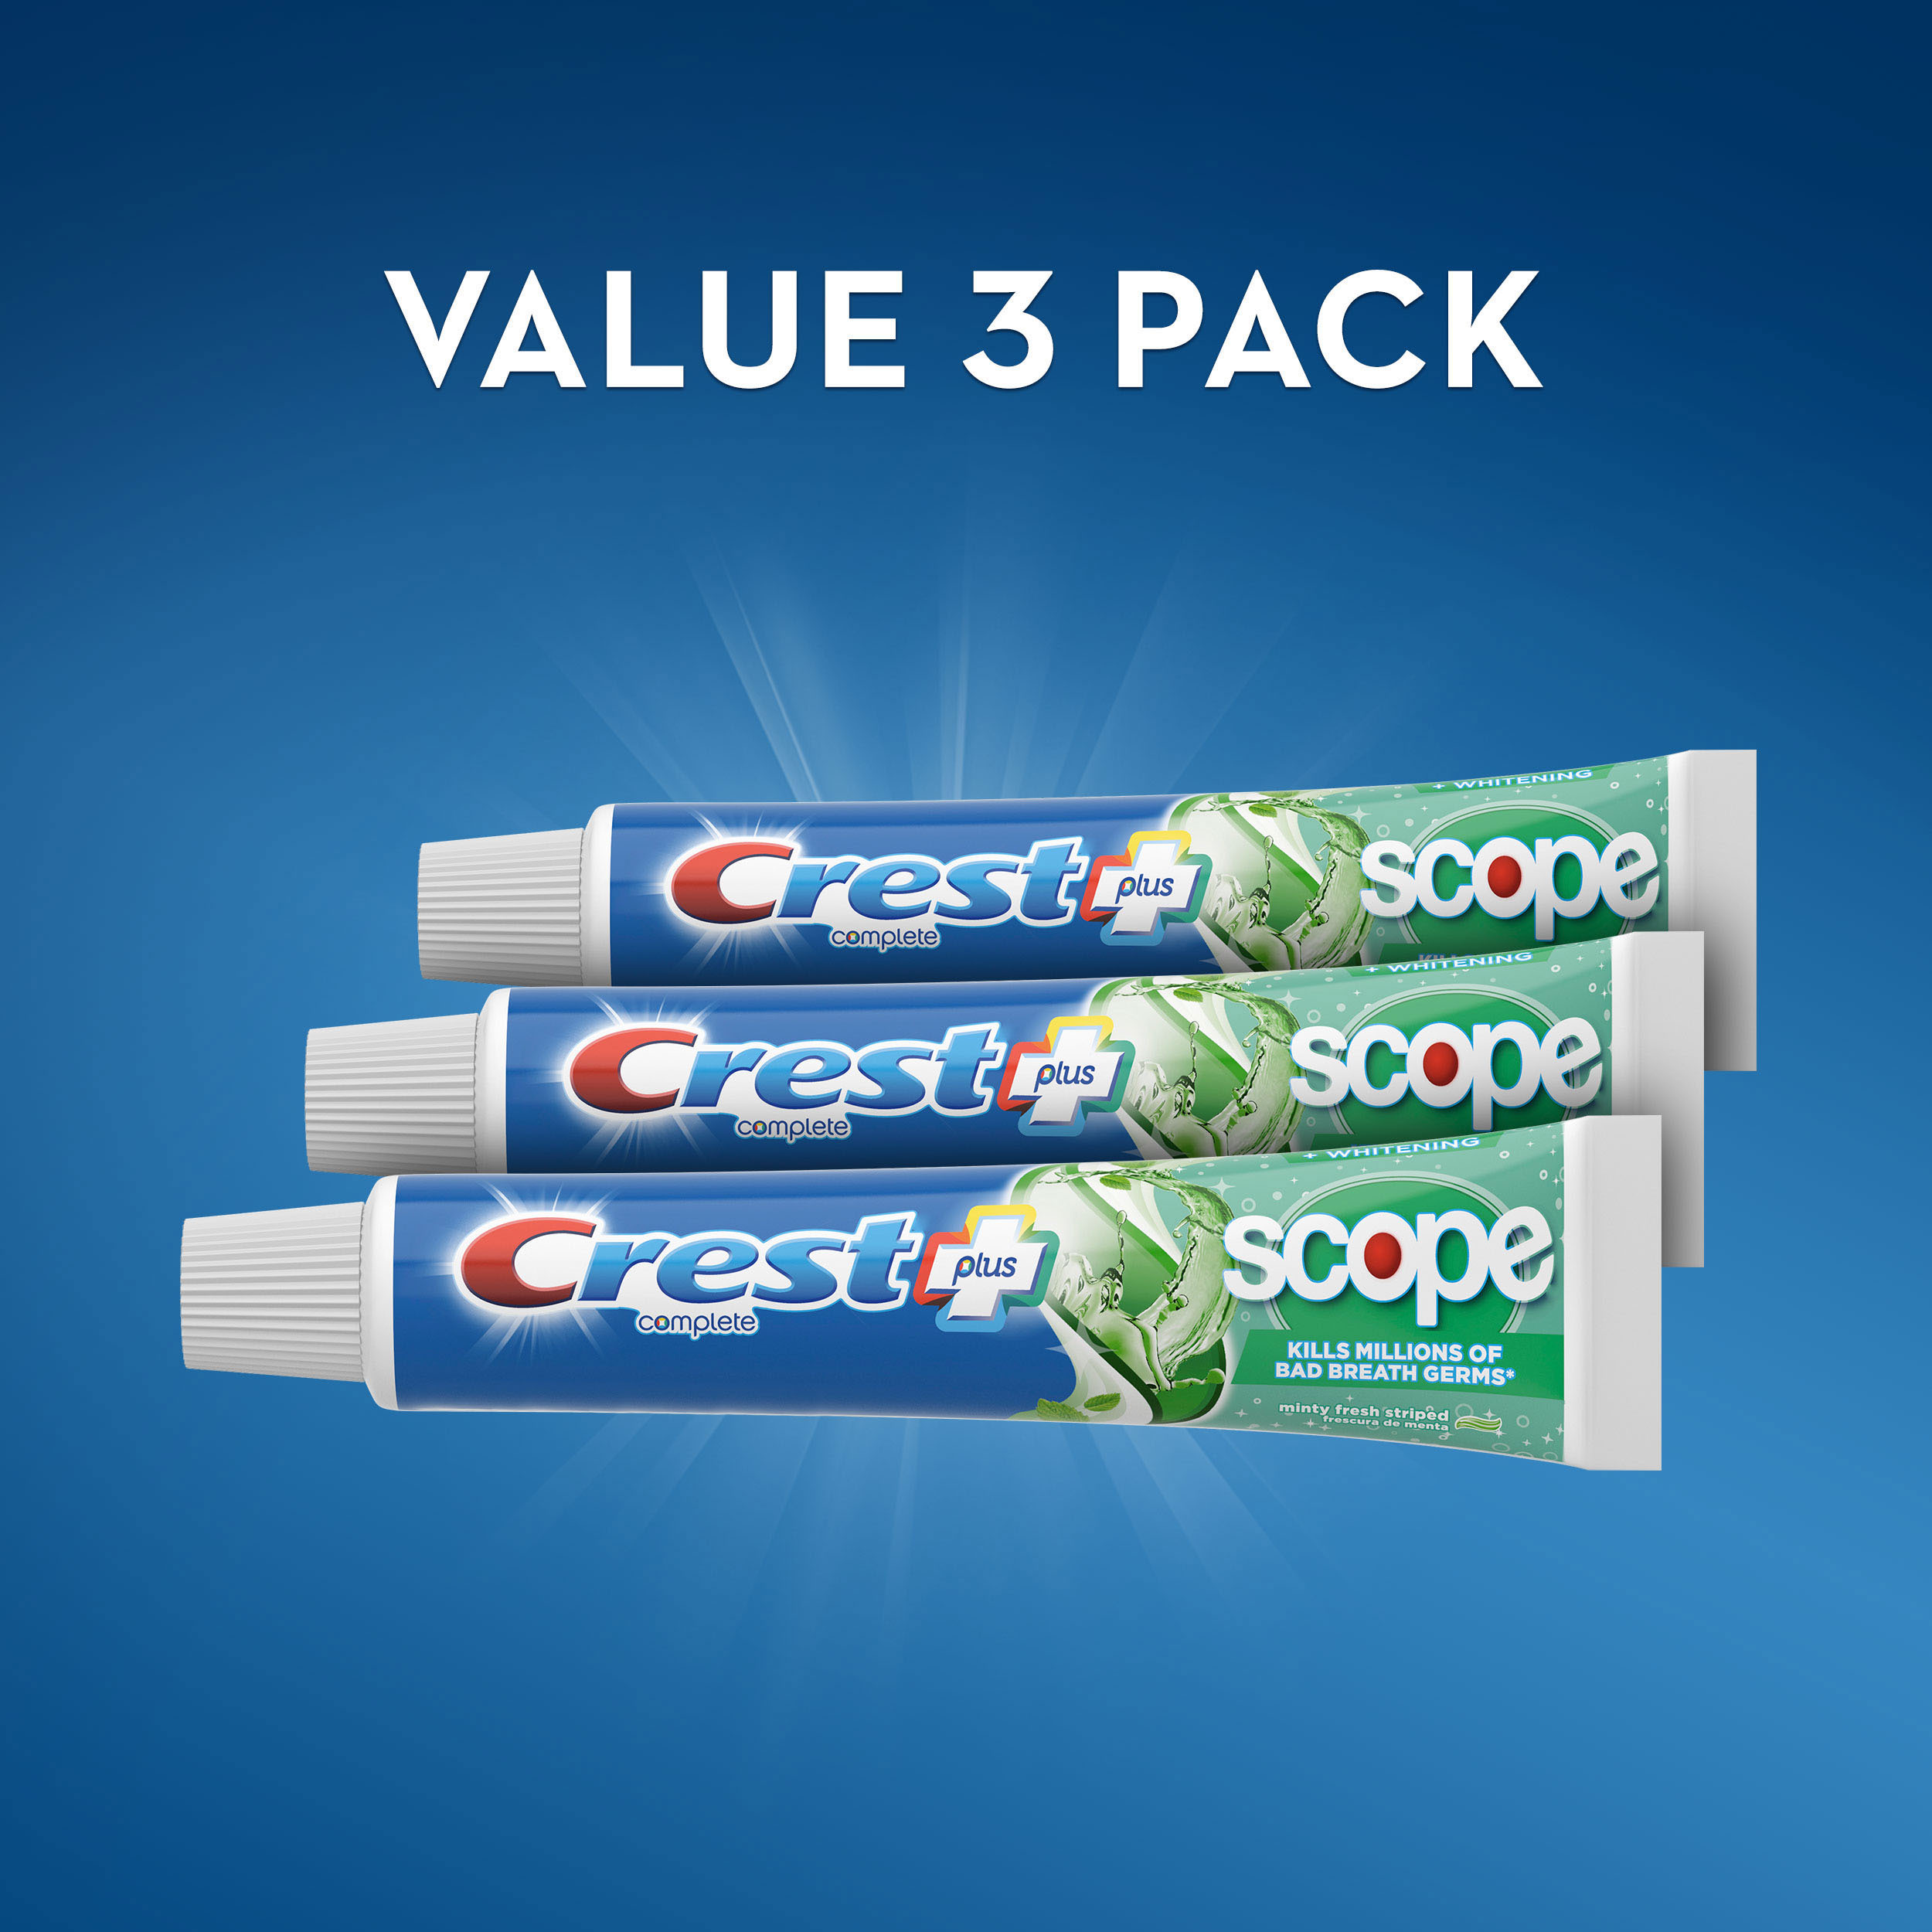 Crest + Scope Complete Whitening Toothpaste, Minty Fresh, 5.4 oz, Pack of 3 - image 5 of 9